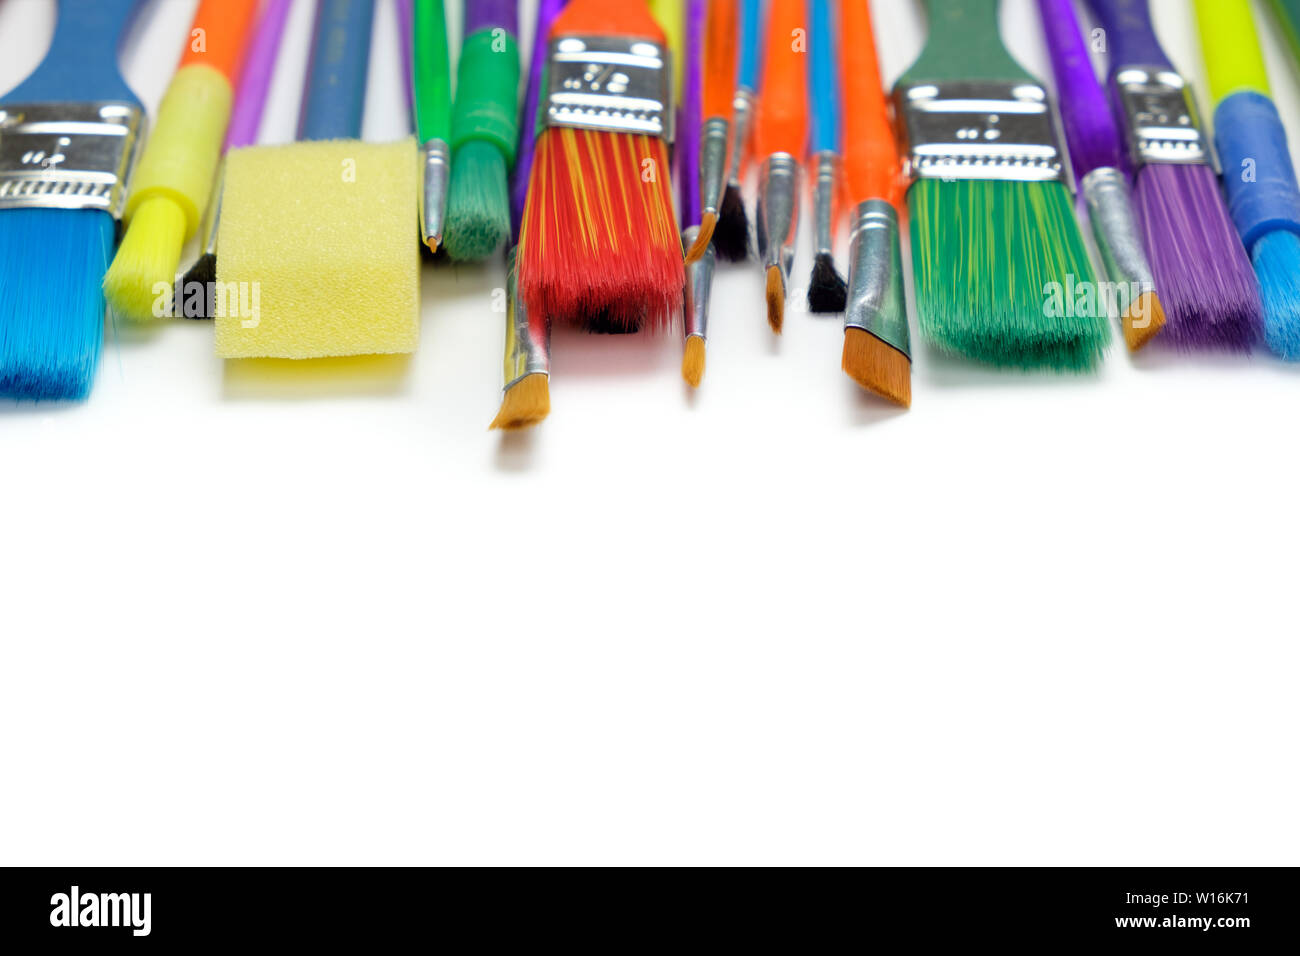 Row of artist paint brushes on white background Stock Photo